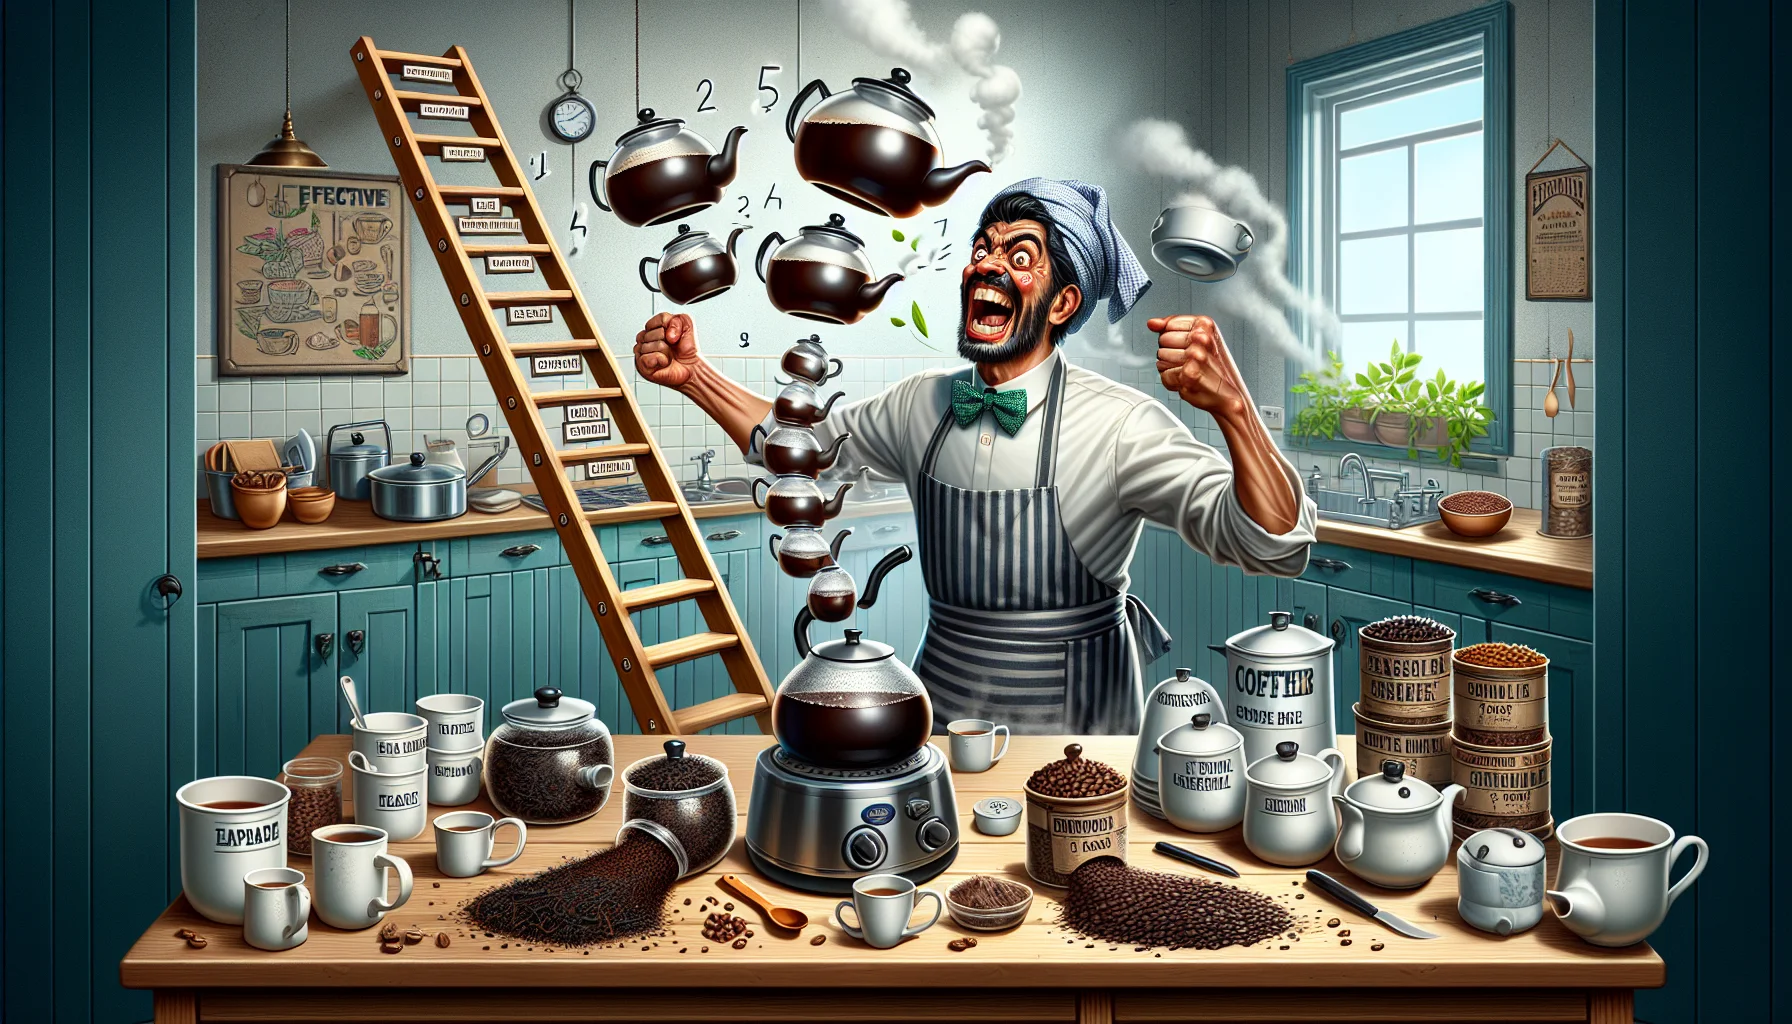 Create a humorous and realistic illustration of a brewing guide. The scene unfolds in an upbeat kitchen setting with a variety of tea and coffee brewing equipment arranged. The main character is an energetic and grimacing South Asian man wearing a smart apron. He is comically juggling several teapots and coffee pots with steam rising from each of them. A ladder stretching towards the ceiling signifies the 'steps', with each step labeled with effective brewing tips. Assorted tea leaves, coffee beans, and other brewing products are scattered about the place adding to the chaos and fun.